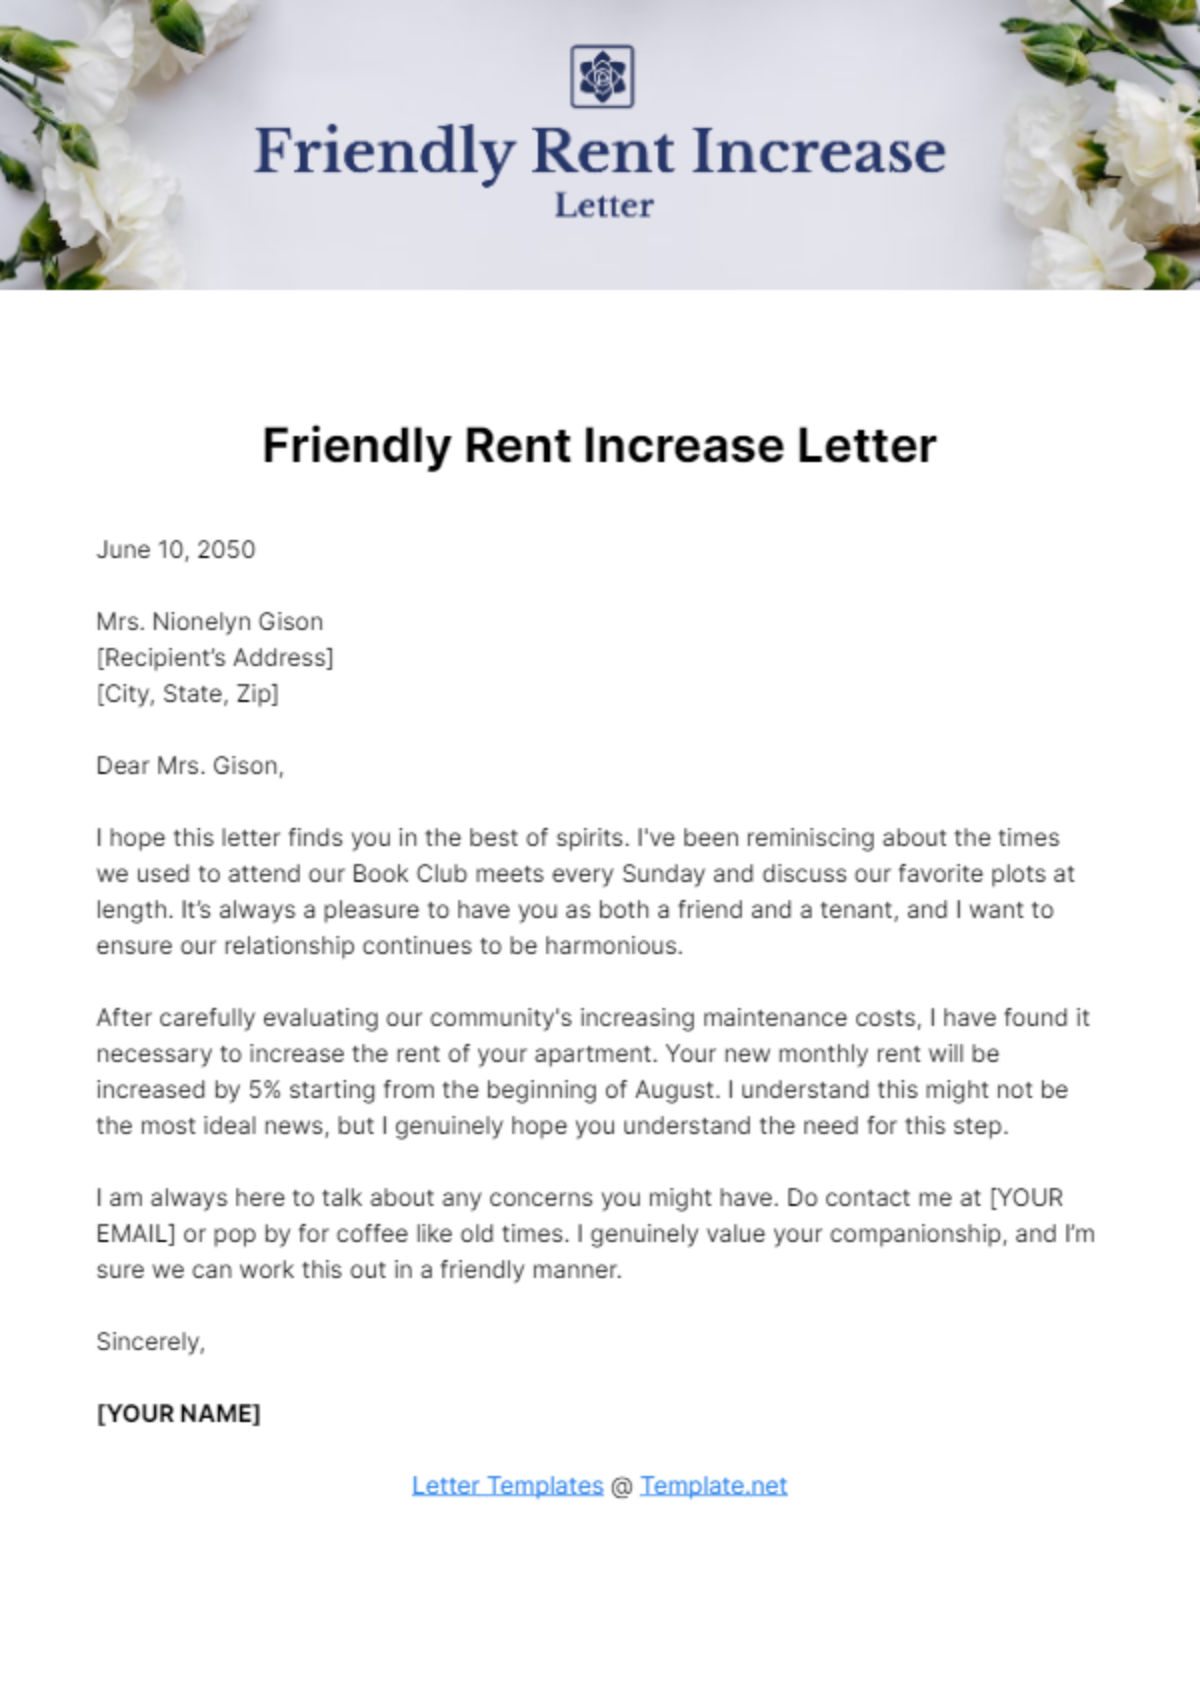 Friendly Rent Increase Letter Template